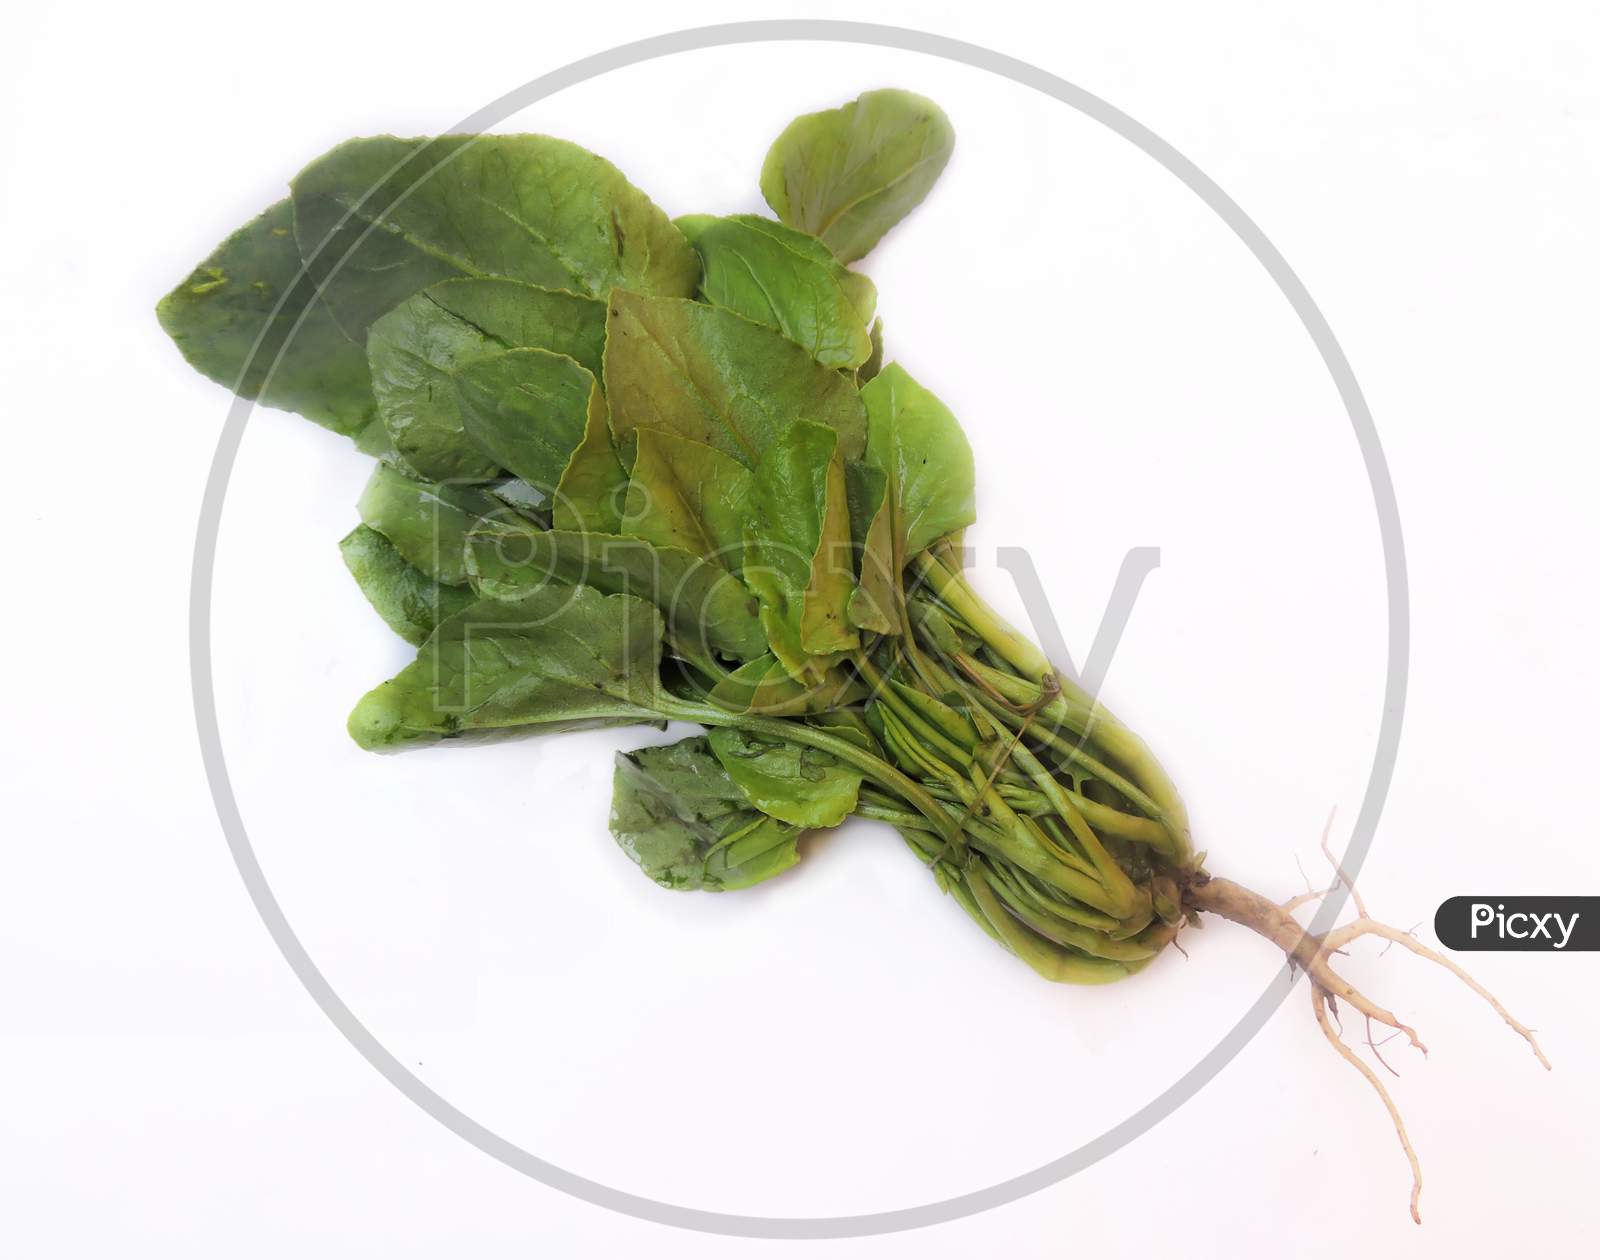 Leafy vegetable- Common sorrel or spinach dock